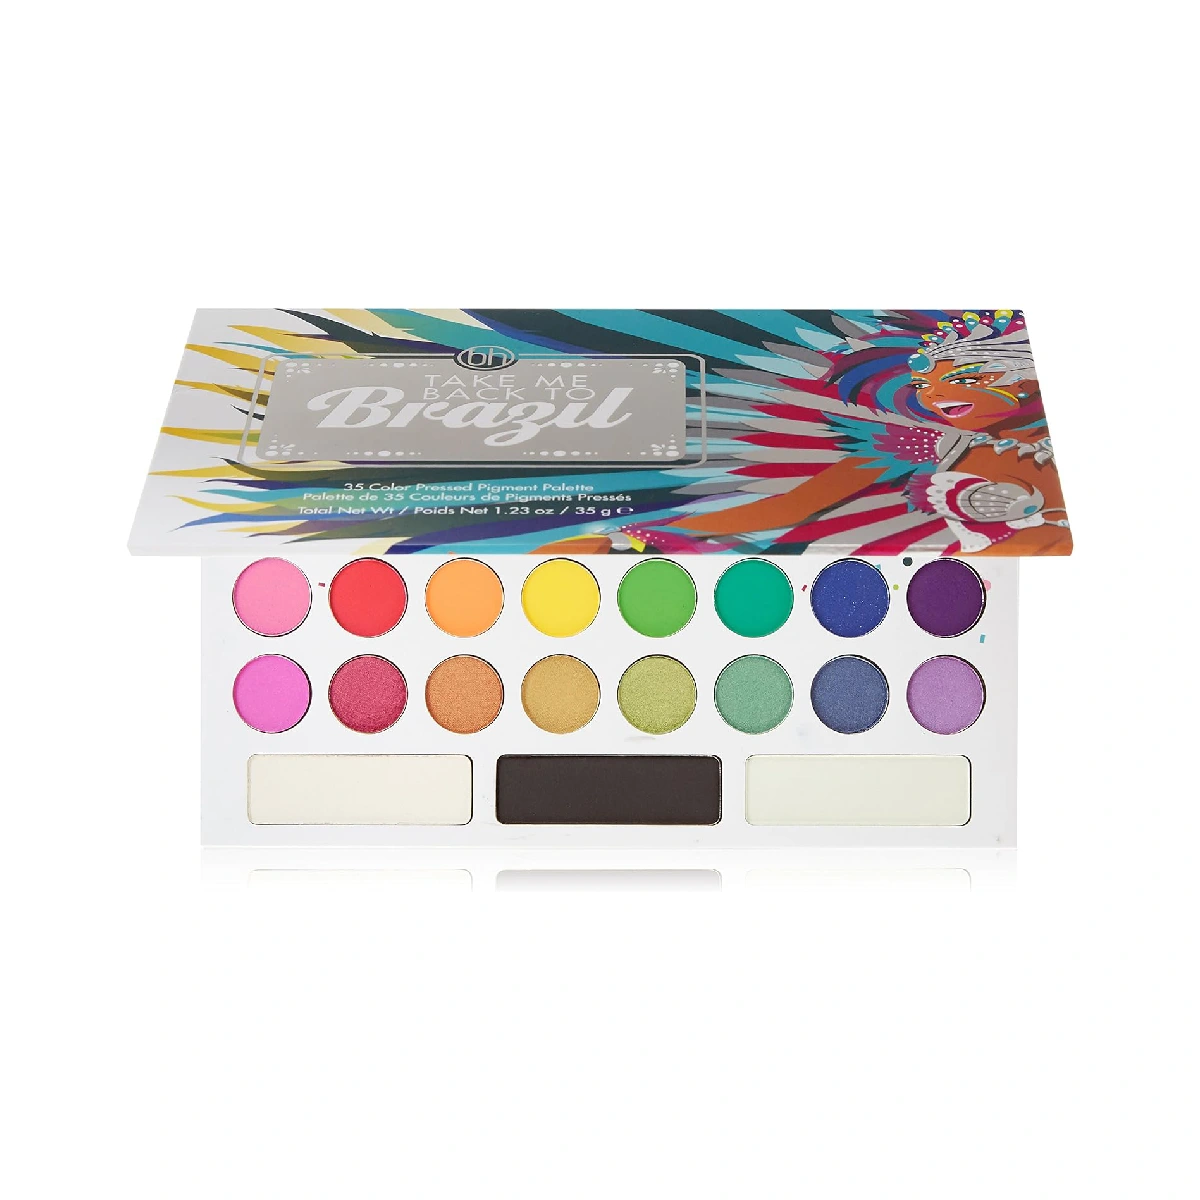 bh Cosmetics 35 Color Eyeshadow Palette - variety of eyeshadows on a white background.